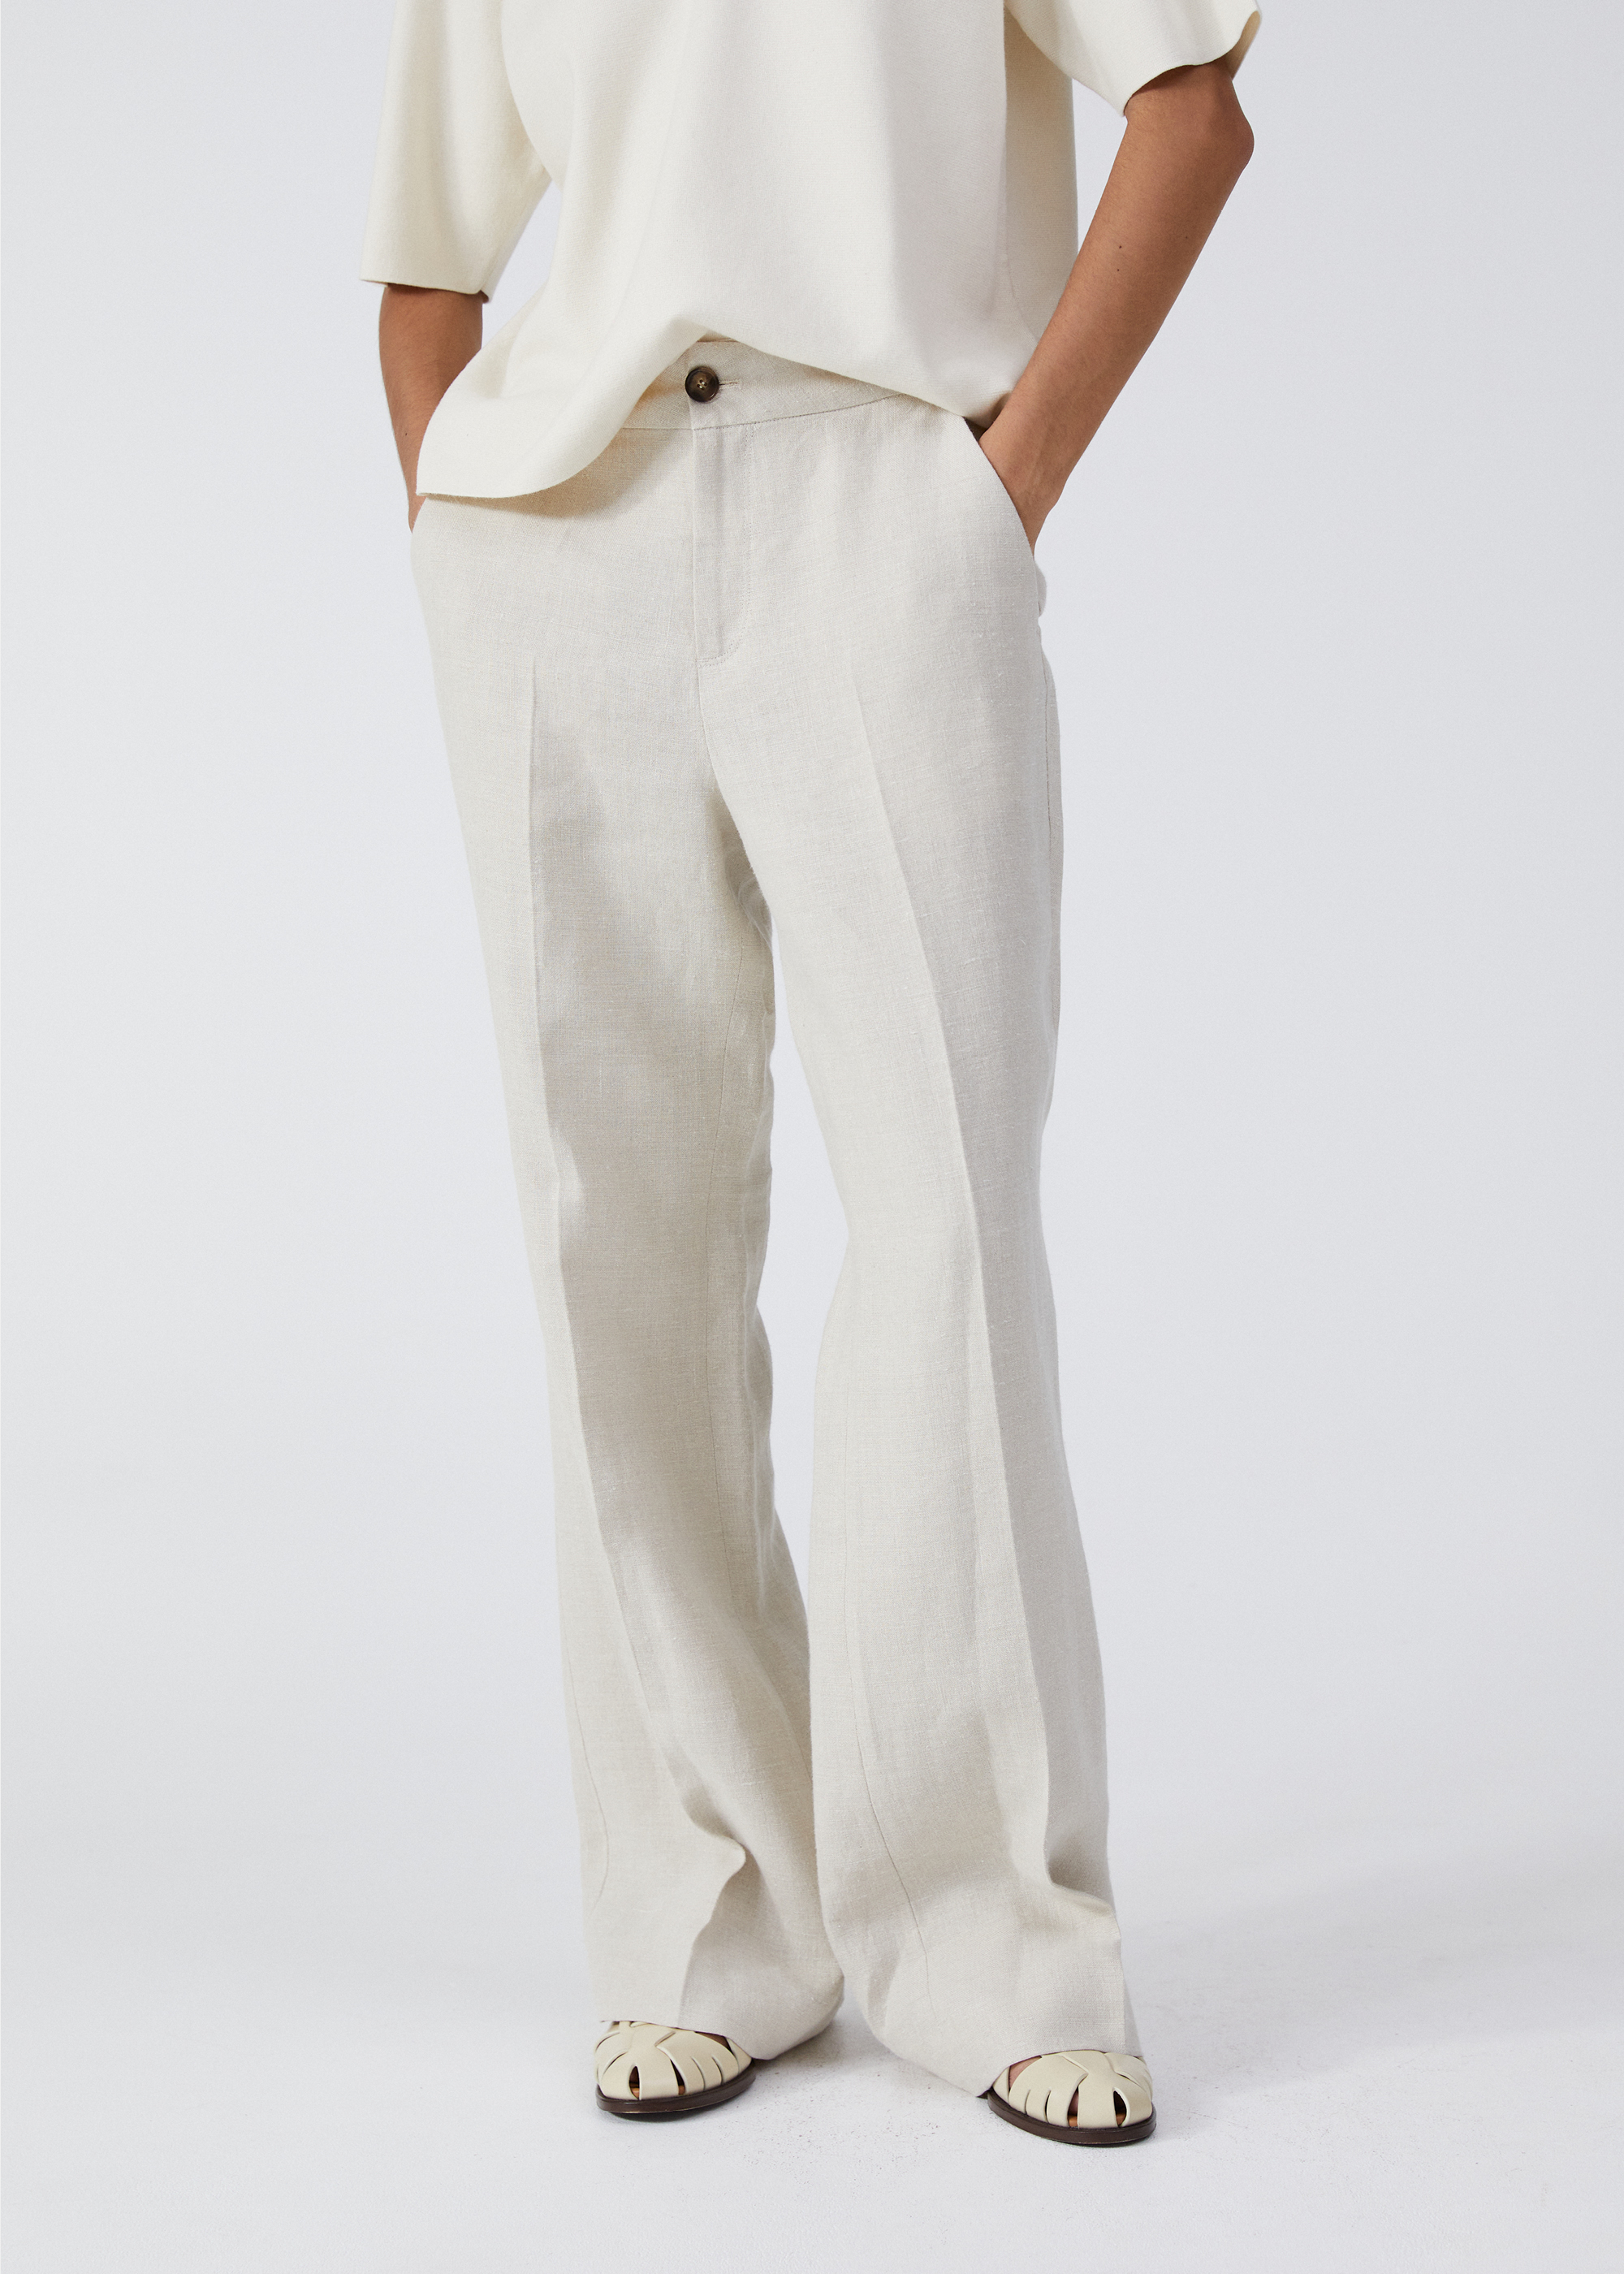 Coming Soon - Milo Pant Tailored Linen